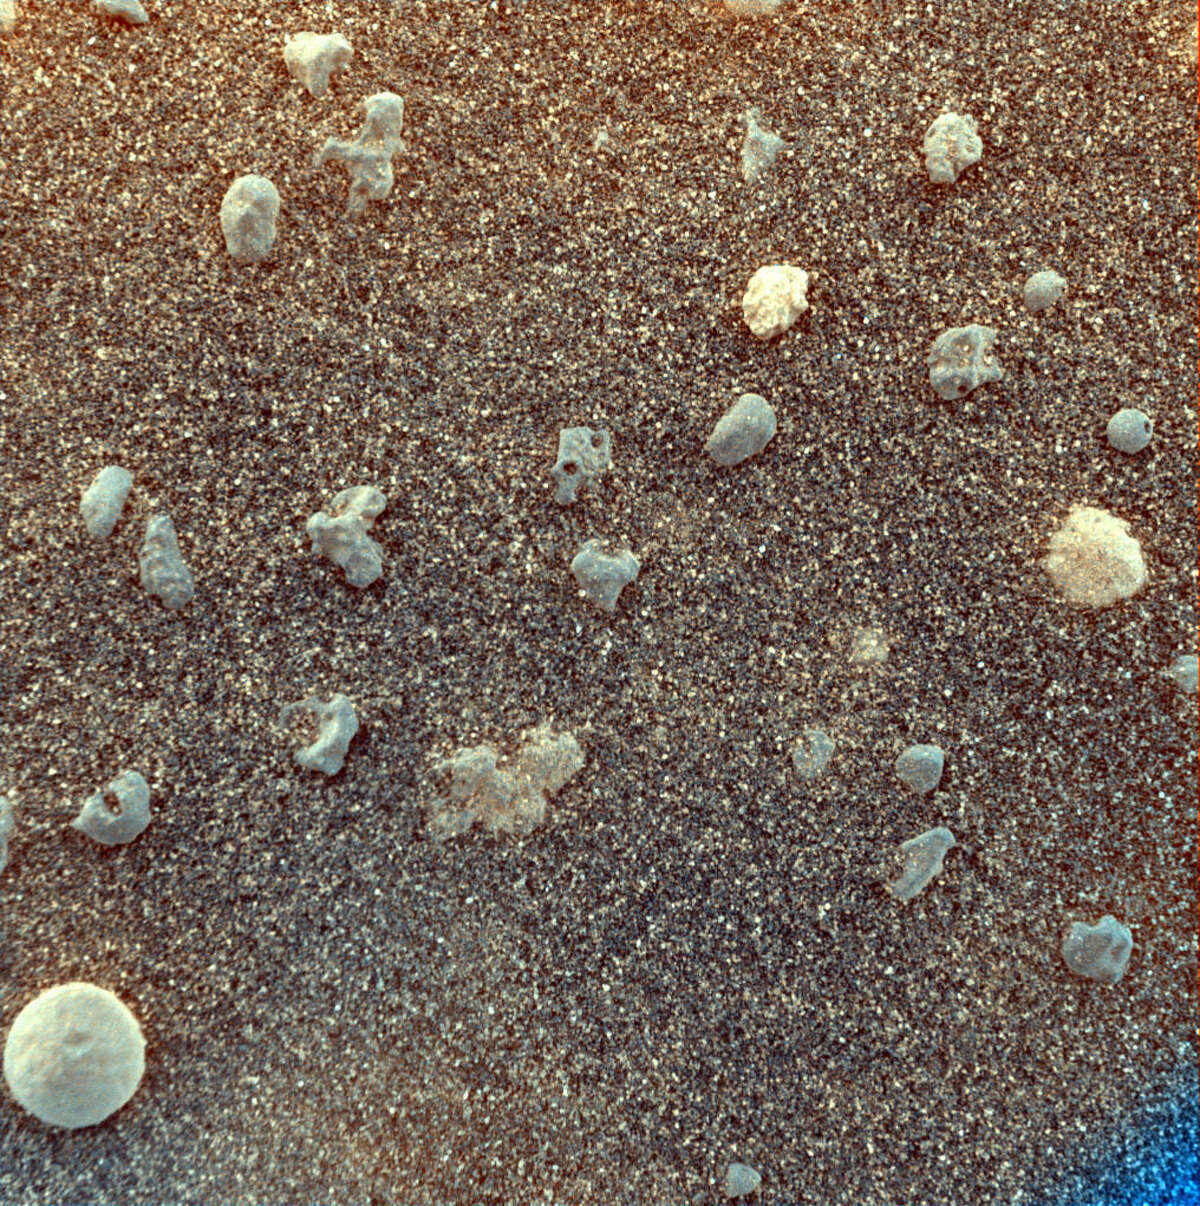 Martian soil, up close A magnified view of Martian soil using Opportunity's microscopic imager. Date: February 4, 2004.